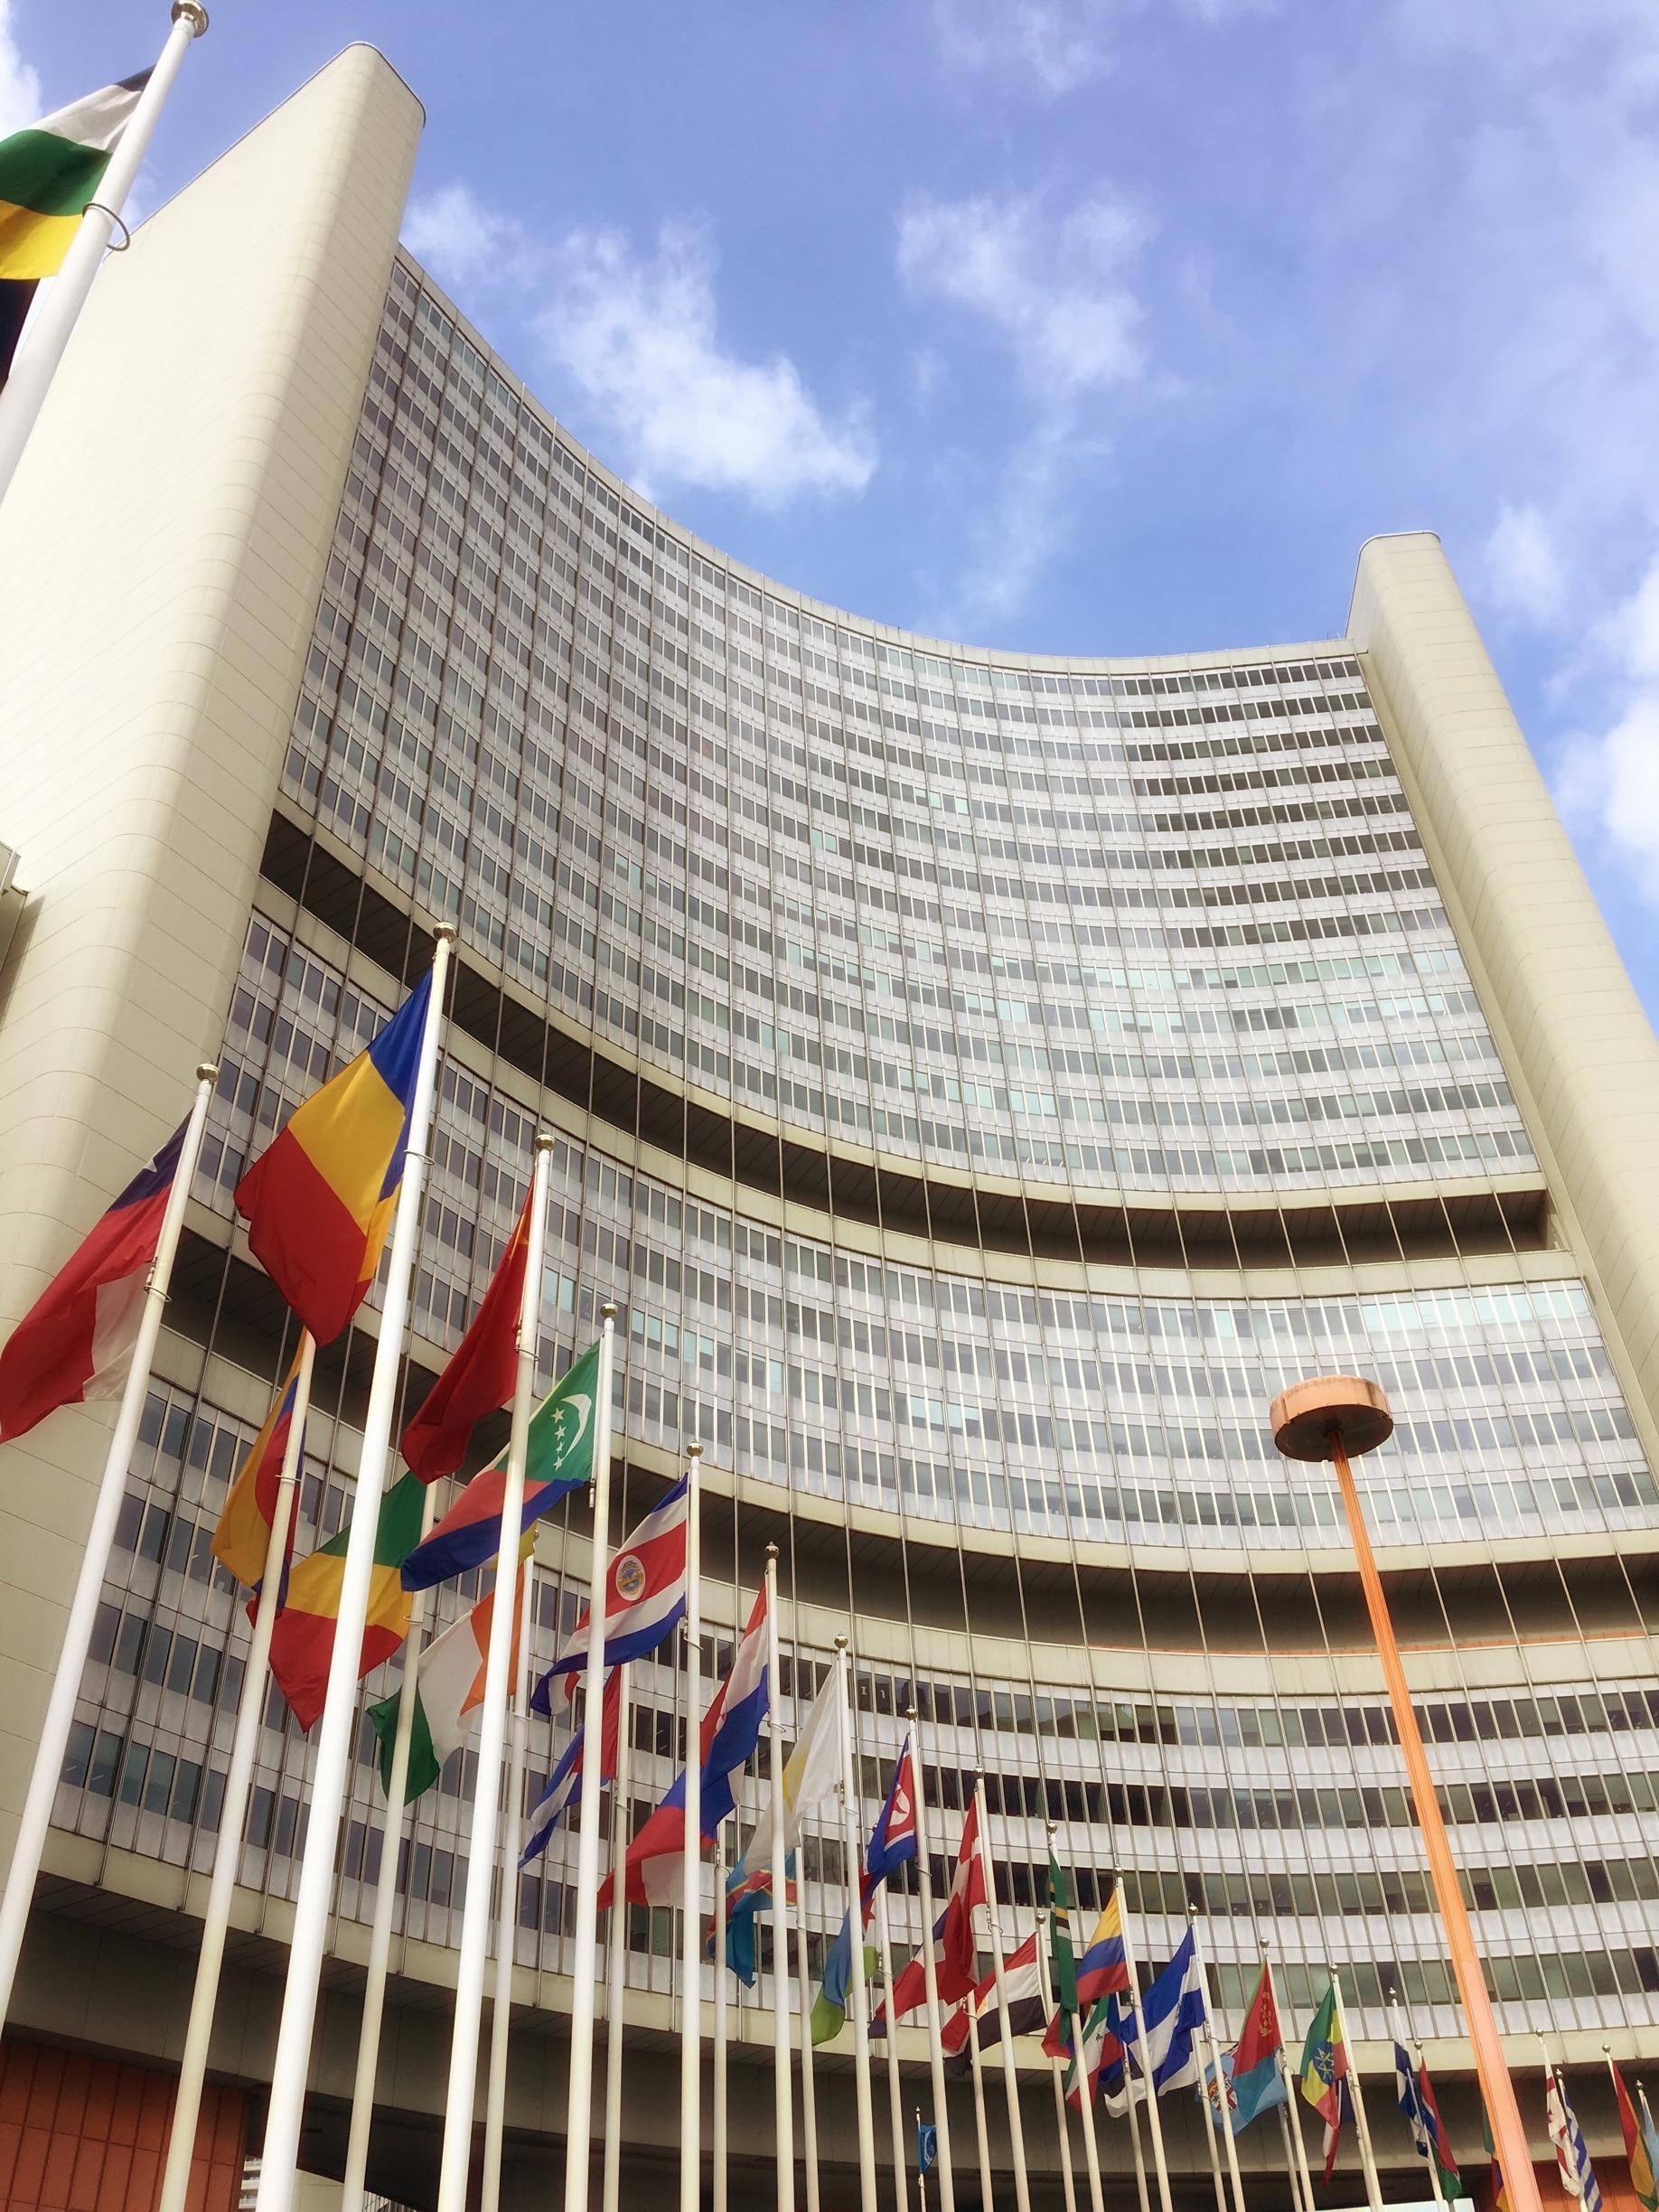 The United Nations is based at the Vienna International Centre and houses one of the four United Nations headquarters around the world. The tour is highly recommended and gives an insight and background to this place and the UN. 